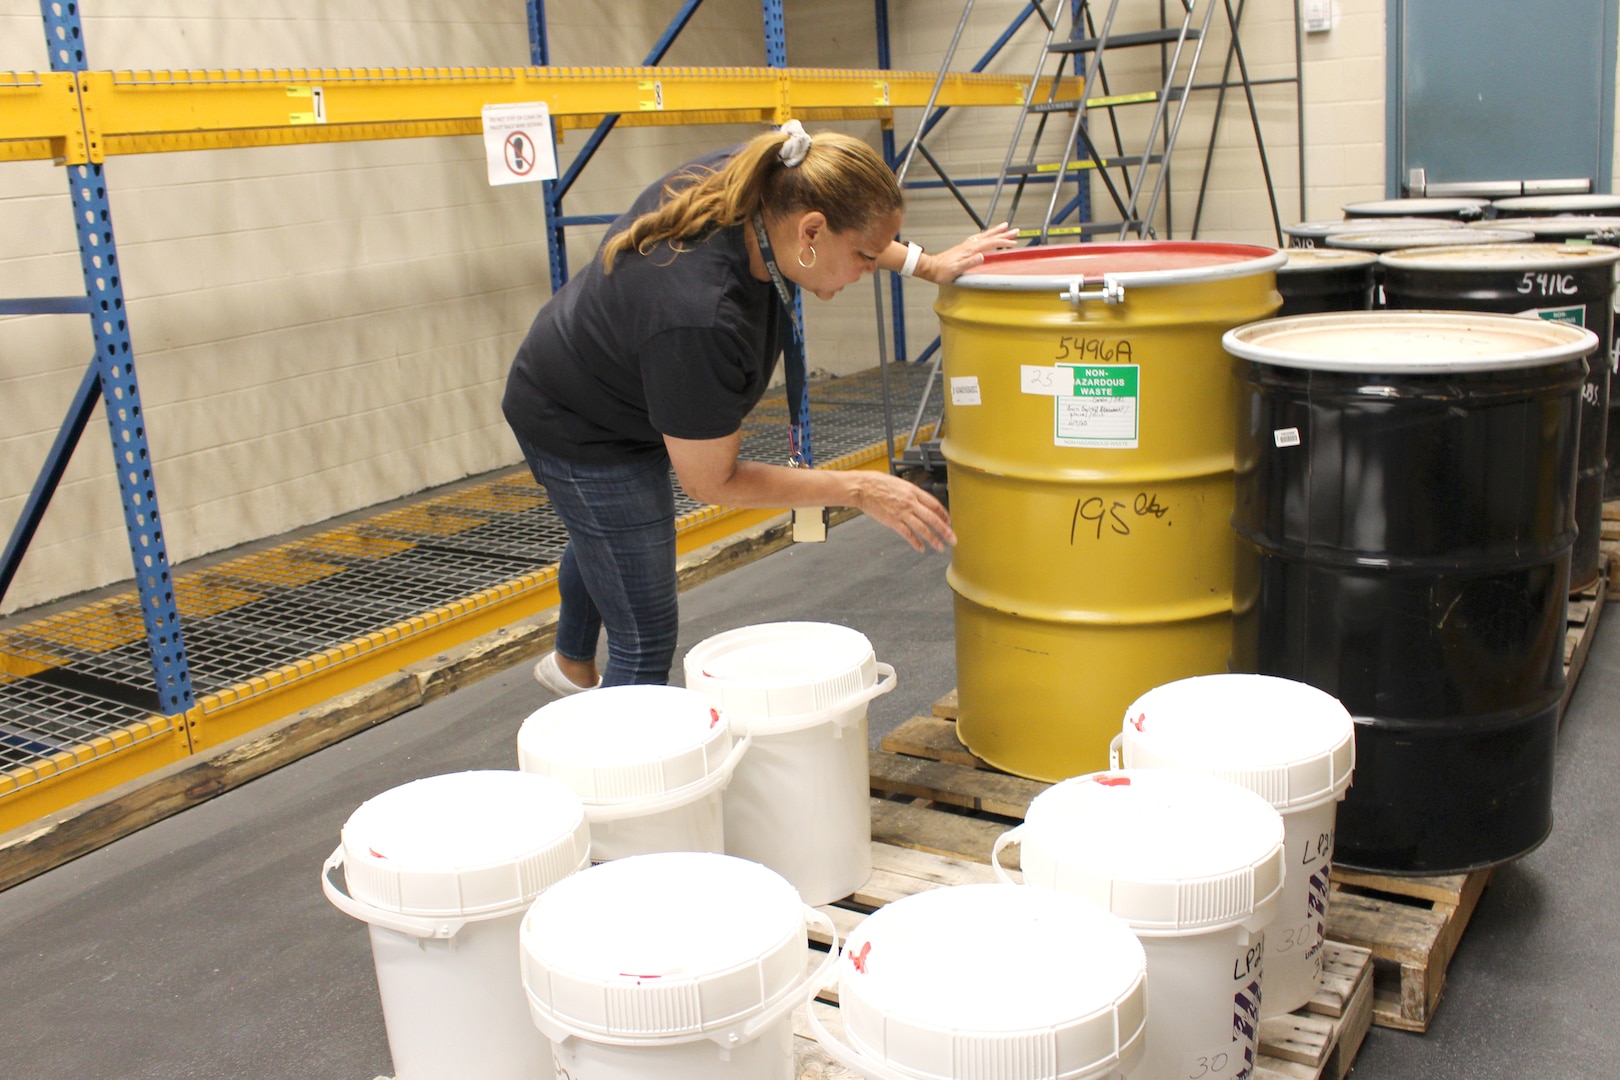 Christina Norman, with the Environmental and Hazardous Waste Operations Group at Arnold Air Force Base, Tenn., checks the label of one of the barrels in the hazardous waste storage facility prior to it being loaded on a truck and taken to the disposal site on June 15, 2021. A current Resource Conservation and Recovery Act Part B permit enables Arnold to store hazardous waste for up to one year at the base’s main storage facility. (U.S. Air Force photo by Deidre Moon)